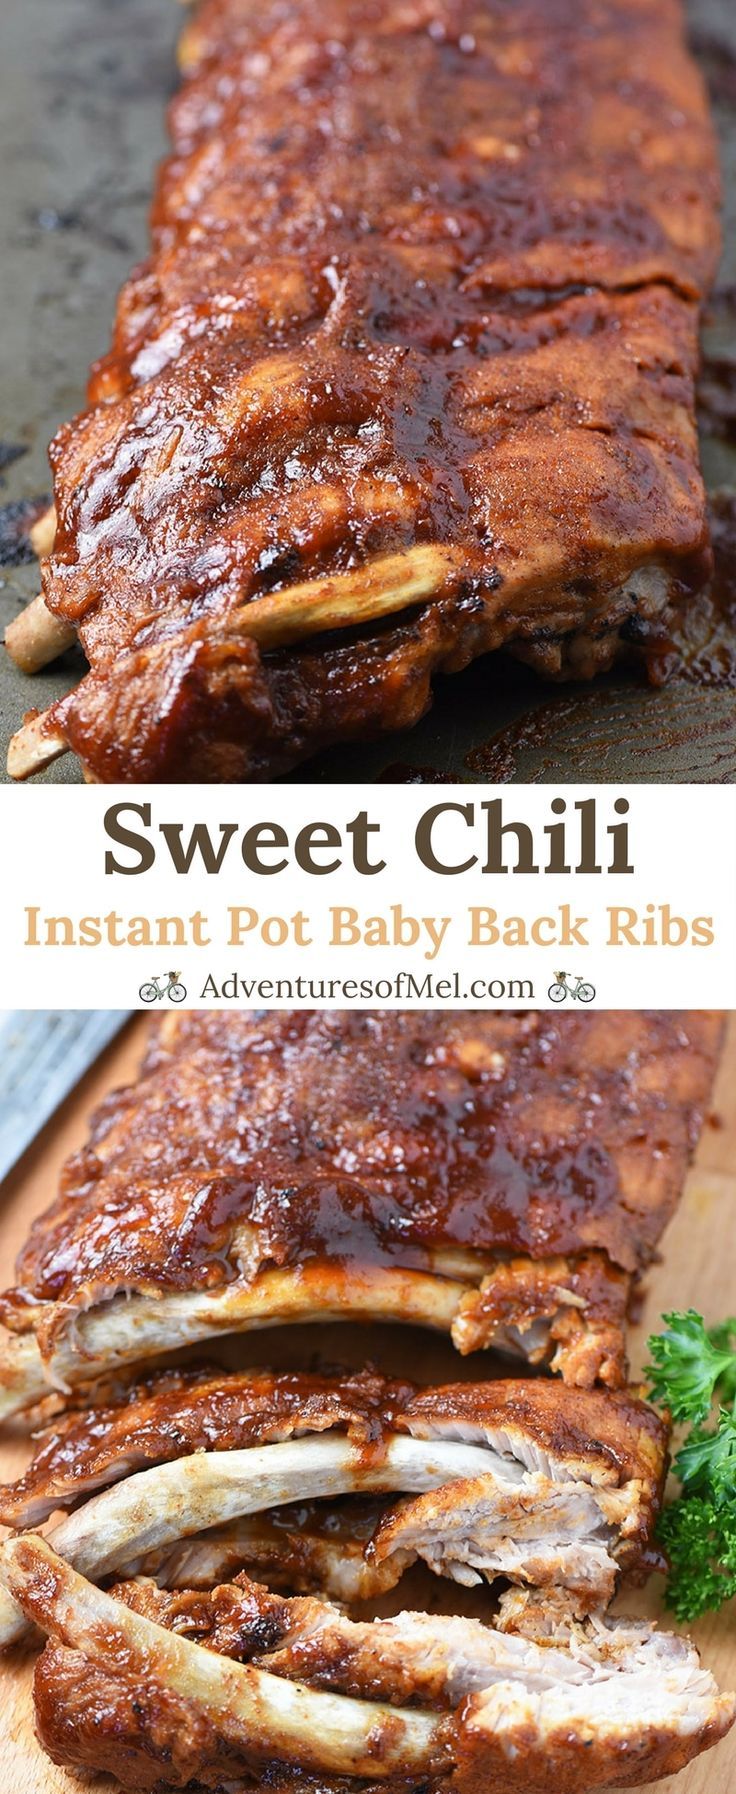 How Long To Cook Baby Back Ribs